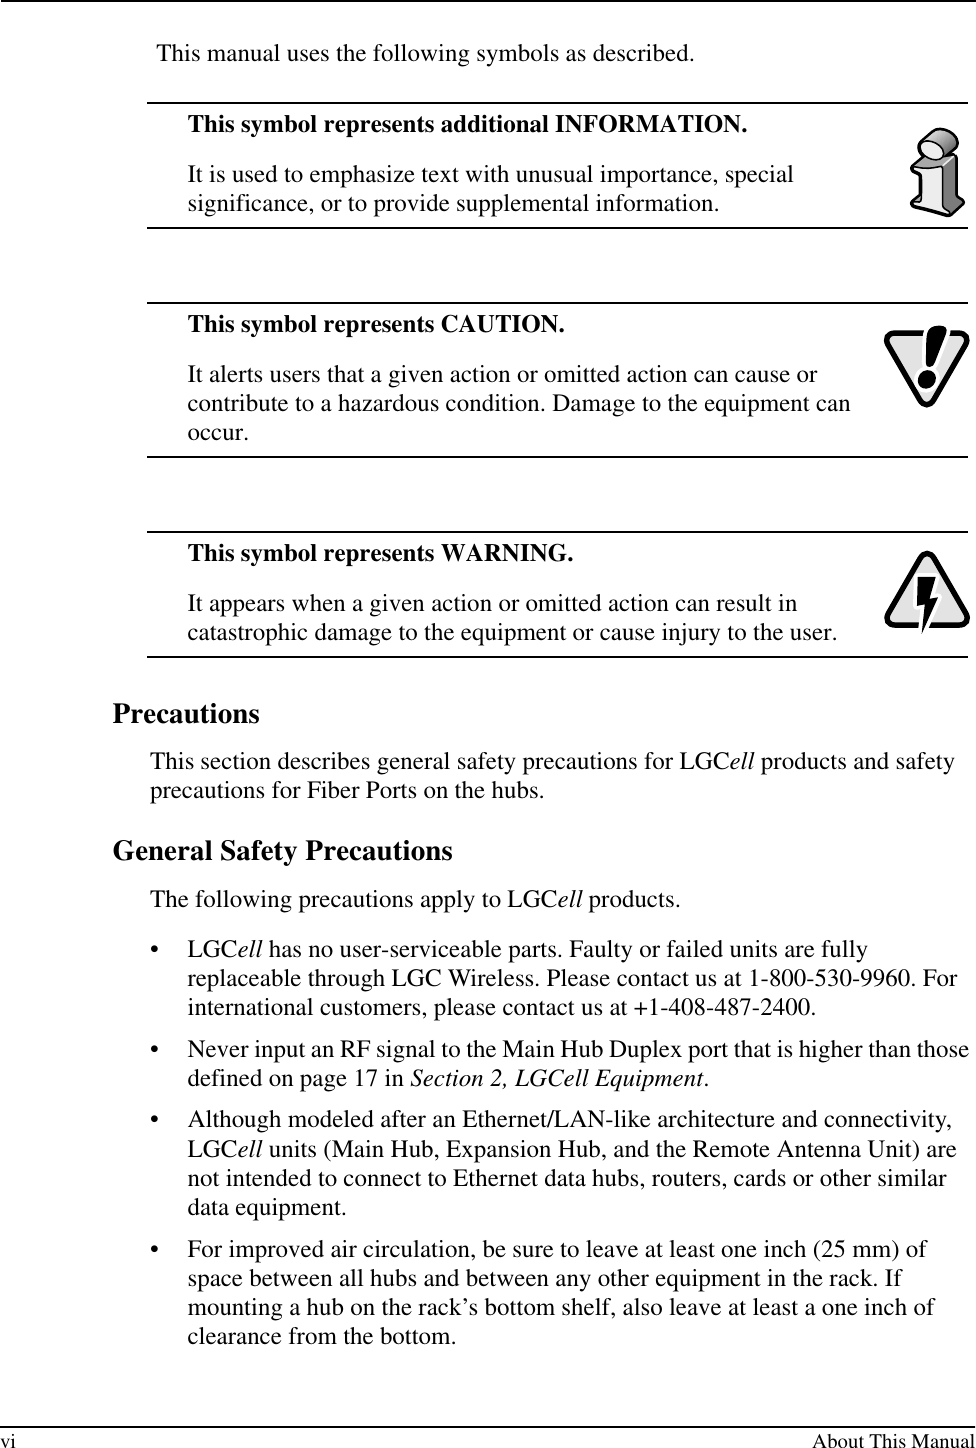 vi About This Manual This manual uses the following symbols as described.This symbol represents additional INFORMATION.It is used to emphasize text with unusual importance, special significance, or to provide supplemental information.This symbol represents CAUTION.It alerts users that a given action or omitted action can cause or contribute to a hazardous condition. Damage to the equipment can occur.This symbol represents WARNING.It appears when a given action or omitted action can result in catastrophic damage to the equipment or cause injury to the user. PrecautionsThis section describes general safety precautions for LGCell products and safety precautions for Fiber Ports on the hubs.General Safety PrecautionsThe following precautions apply to LGCell products.• LGCell has no user-serviceable parts. Faulty or failed units are fully replaceable through LGC Wireless. Please contact us at 1-800-530-9960. For international customers, please contact us at +1-408-487-2400.• Never input an RF signal to the Main Hub Duplex port that is higher than those defined on page 17 in Section 2, LGCell Equipment.• Although modeled after an Ethernet/LAN-like architecture and connectivity, LGCell units (Main Hub, Expansion Hub, and the Remote Antenna Unit) are not intended to connect to Ethernet data hubs, routers, cards or other similar data equipment.• For improved air circulation, be sure to leave at least one inch (25 mm) of space between all hubs and between any other equipment in the rack. If mounting a hub on the rack’s bottom shelf, also leave at least a one inch of clearance from the bottom.